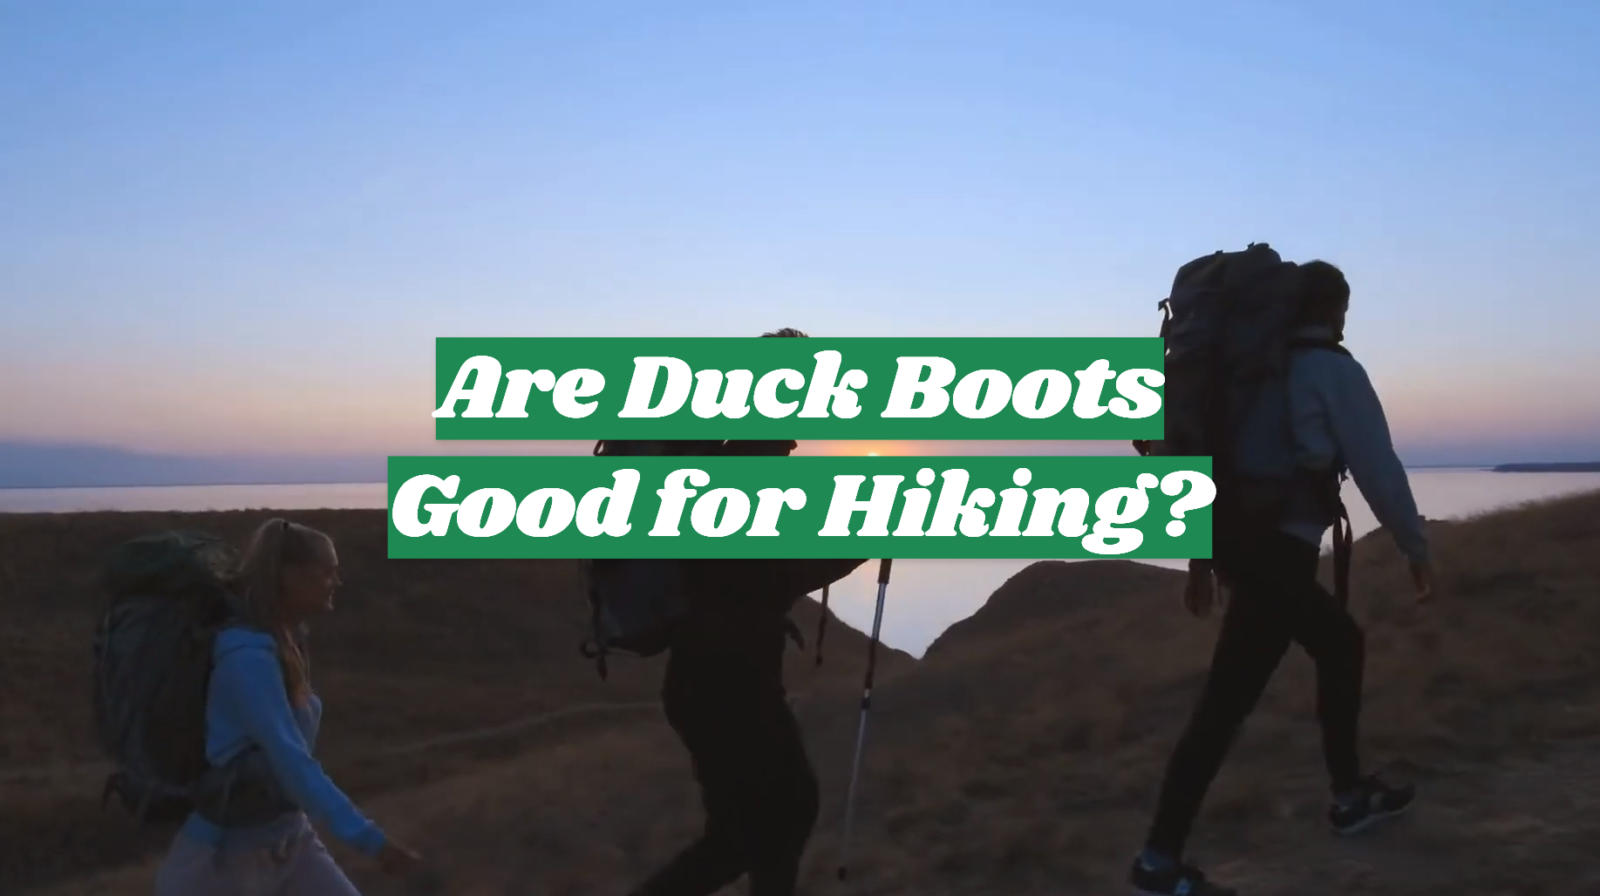 Are Duck Boots Good for Hiking?